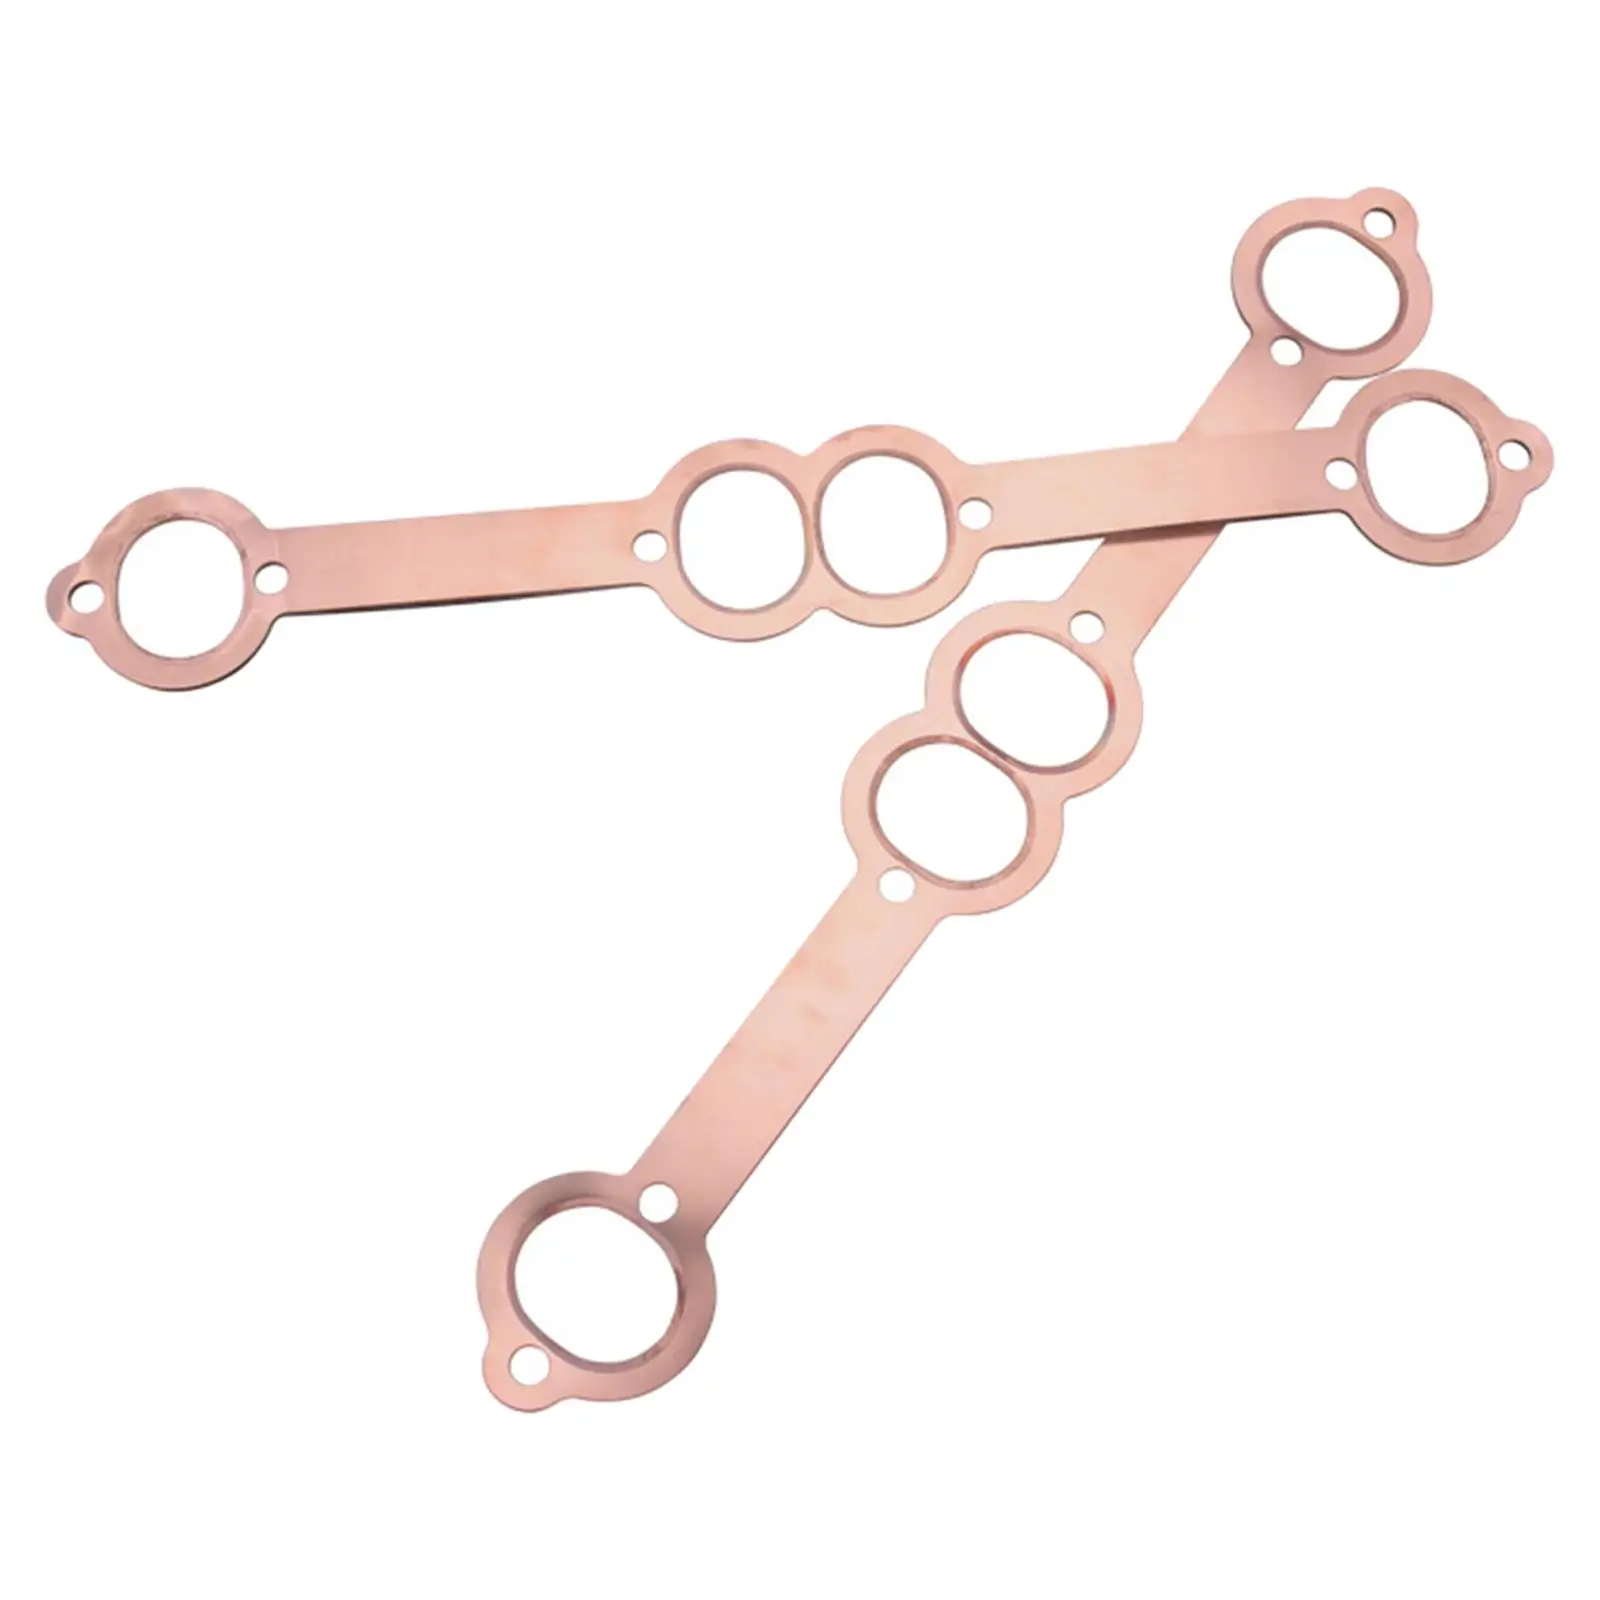 2 Pieces Auto Copper Header Exhaust Gaskets for SB 350 383 400